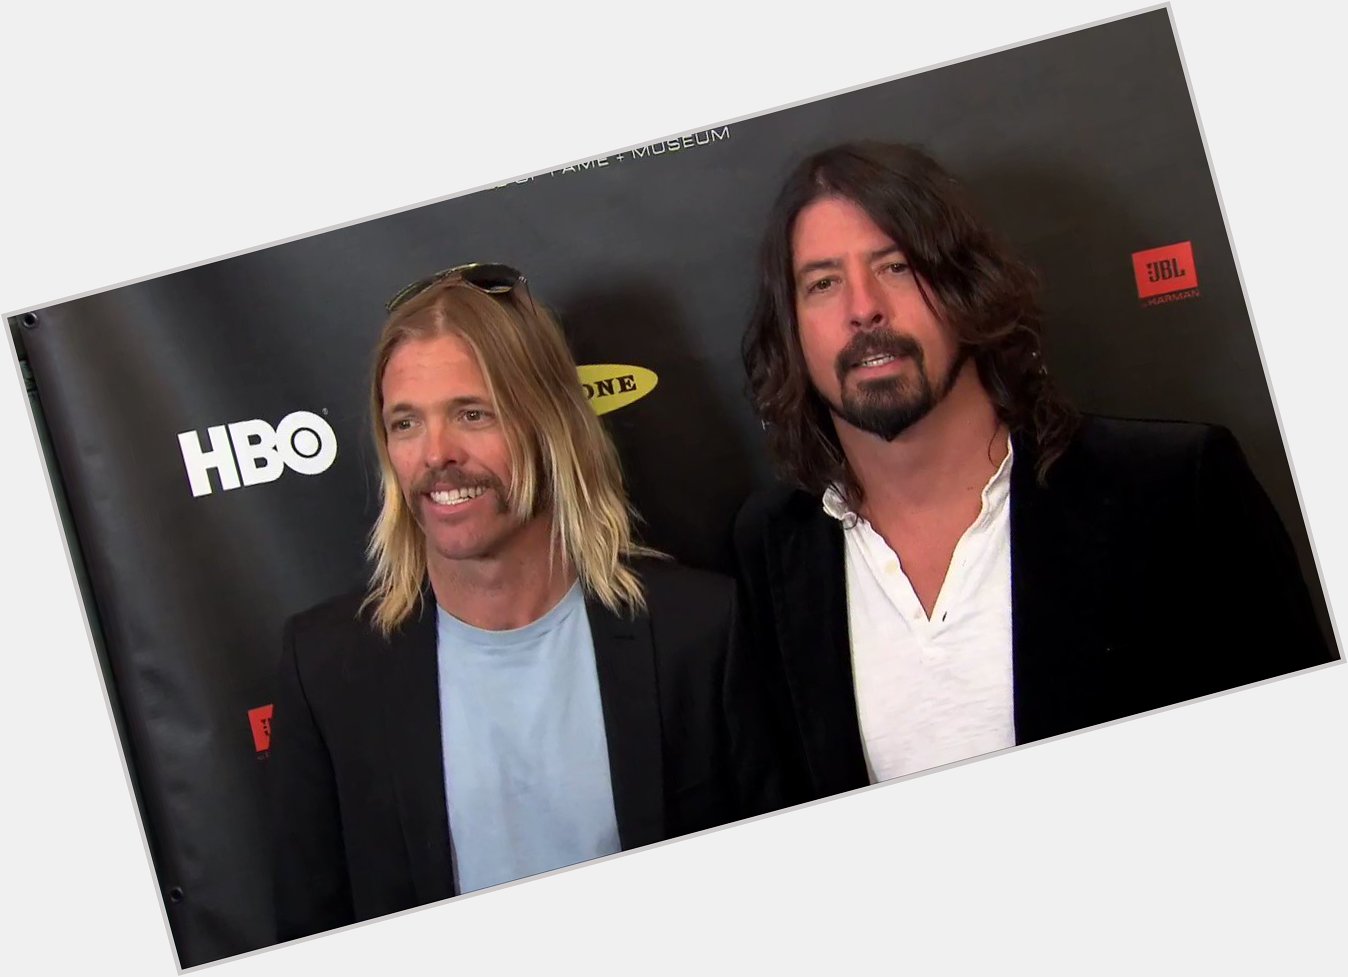 Wishing a Happy 51st Birthday to Dave Grohl! 